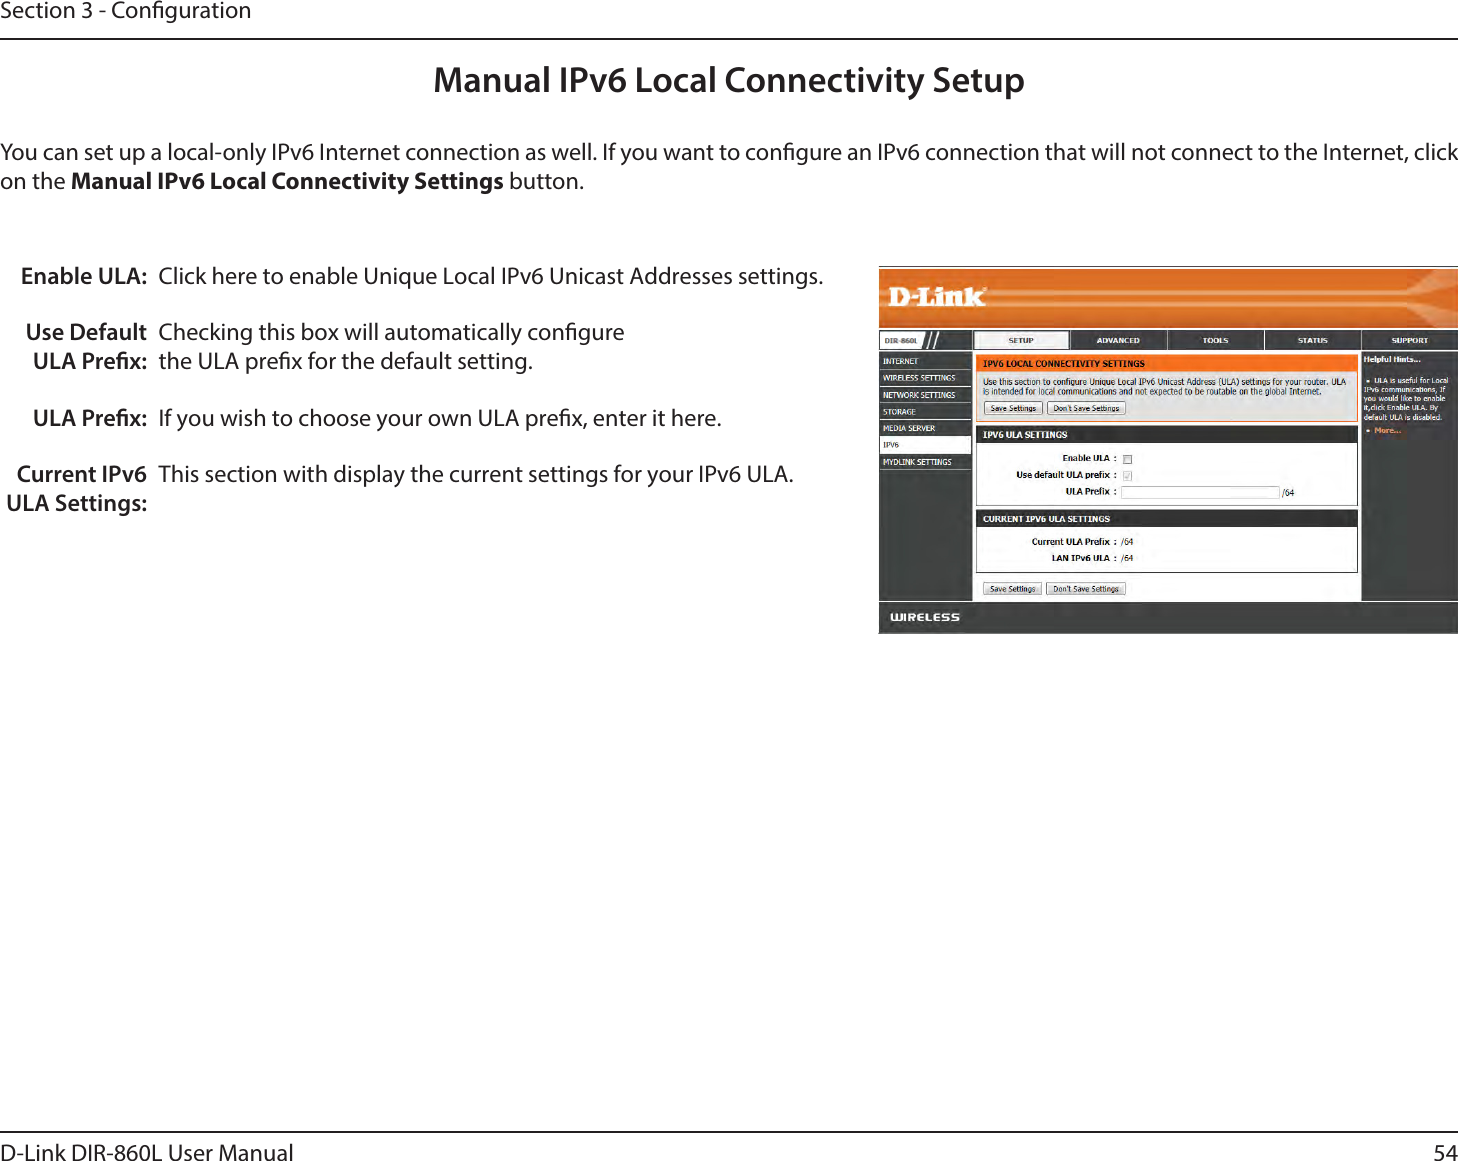 54D-Link DIR-860L User ManualSection 3 - CongurationManual IPv6 Local Connectivity SetupYou can set up a local-only IPv6 Internet connection as well. If you want to congure an IPv6 connection that will not connect to the Internet, click on the Manual IPv6 Local Connectivity Settings button.Enable ULA:Use Default ULA Prex:ULA Prex:Current IPv6 ULA Settings:Click here to enable Unique Local IPv6 Unicast Addresses settings.Checking this box will automatically congure the ULA prex for the default setting.If you wish to choose your own ULA prex, enter it here.This section with display the current settings for your IPv6 ULA.